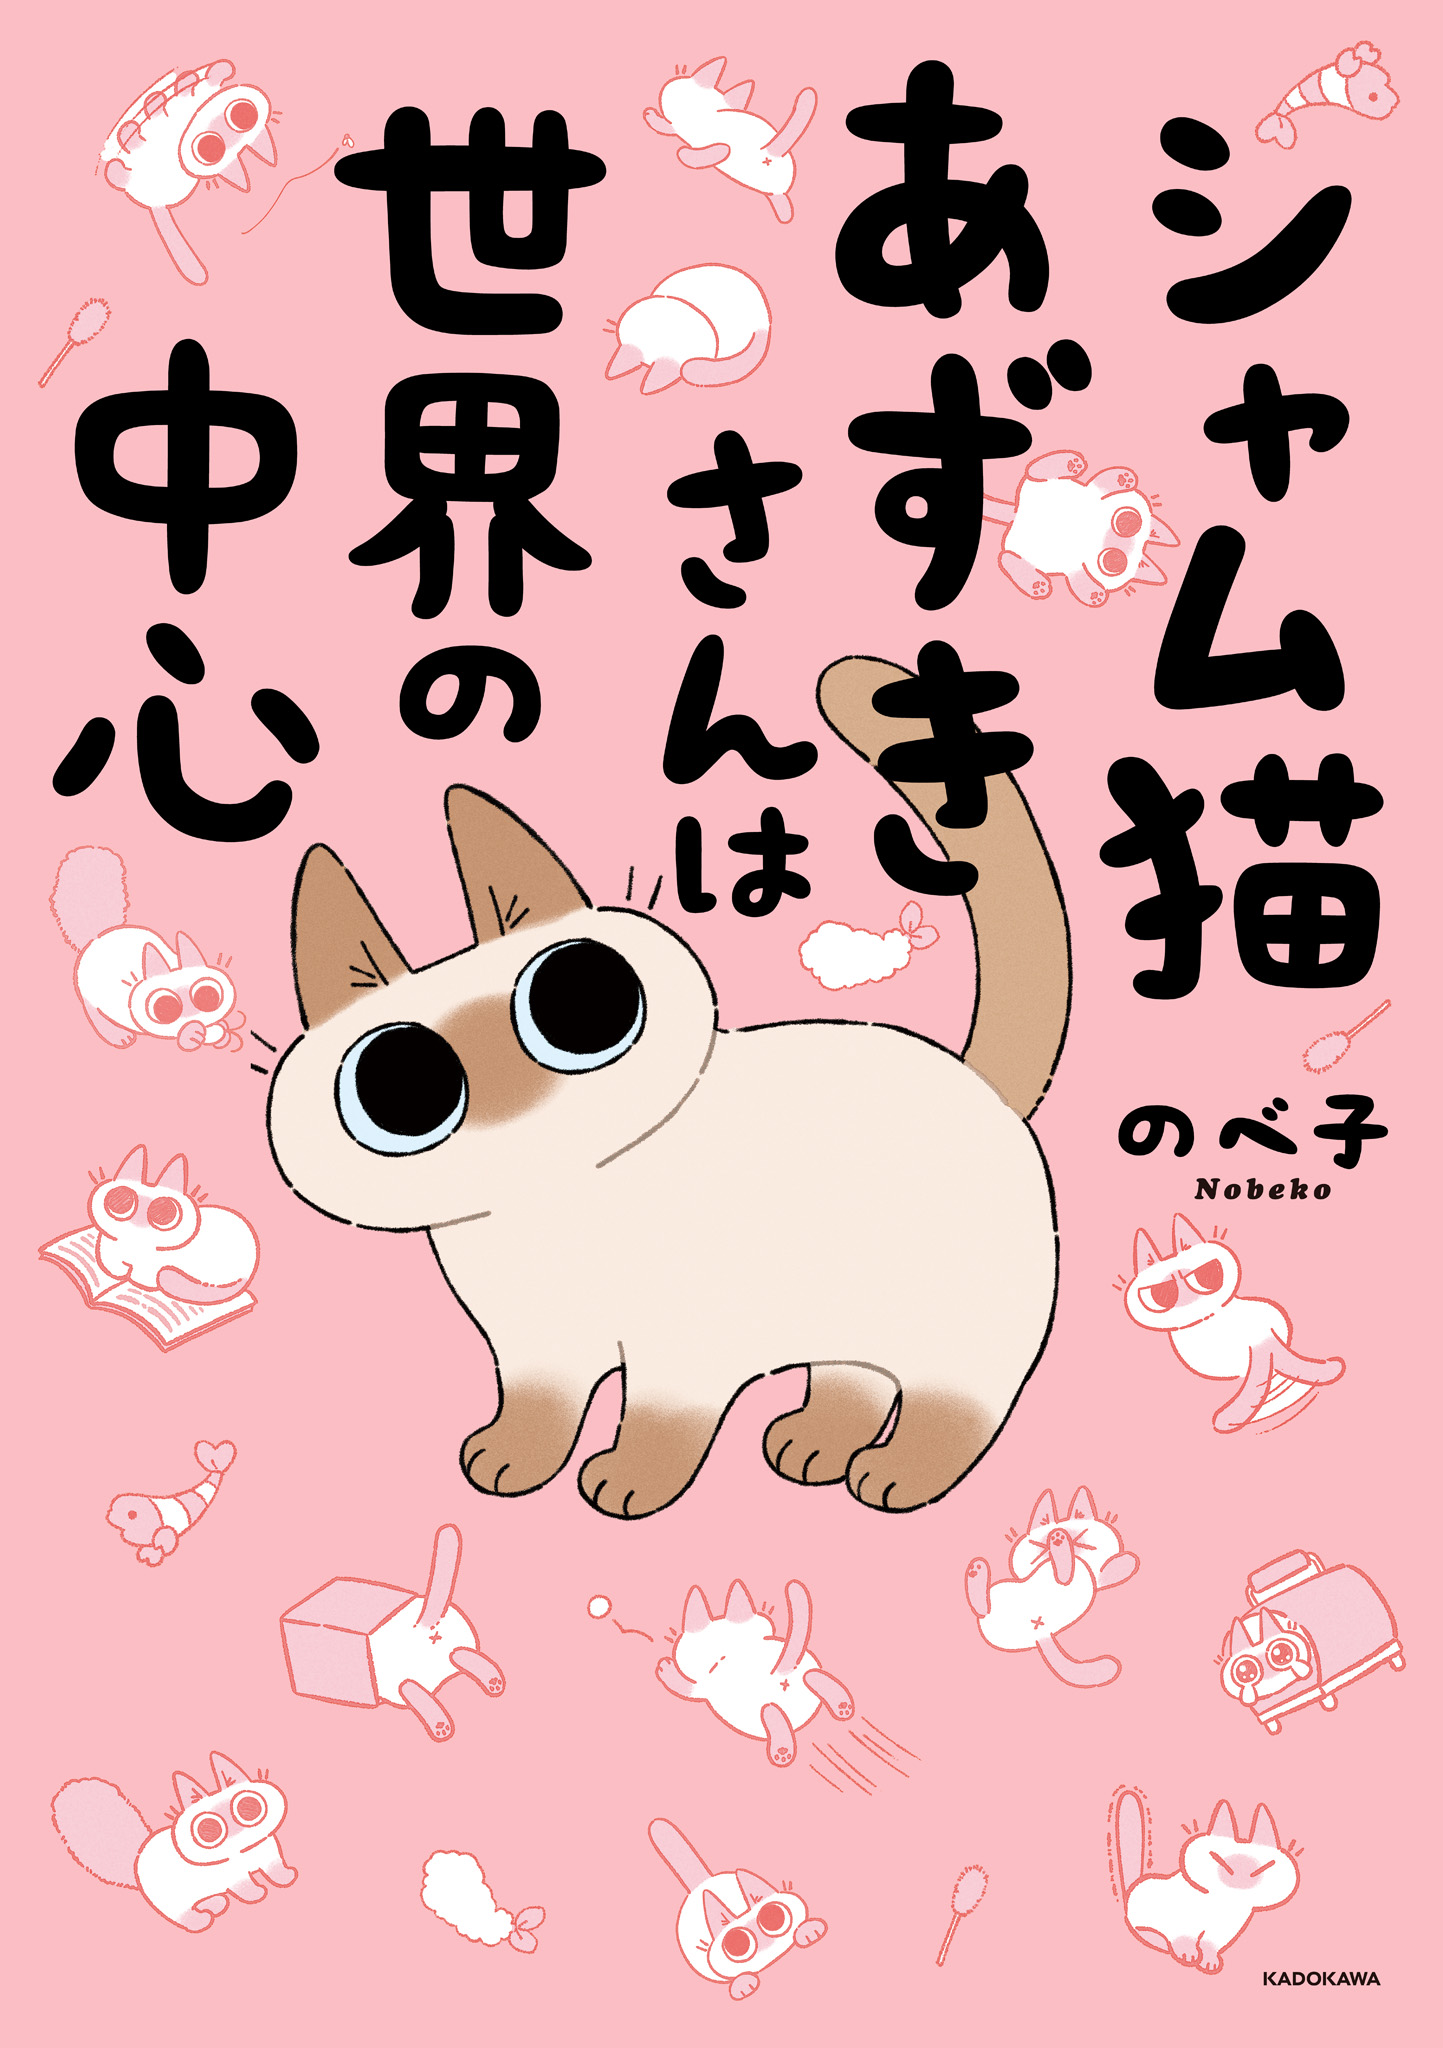 Siamese cat Azuki is the center of the world thumbnail